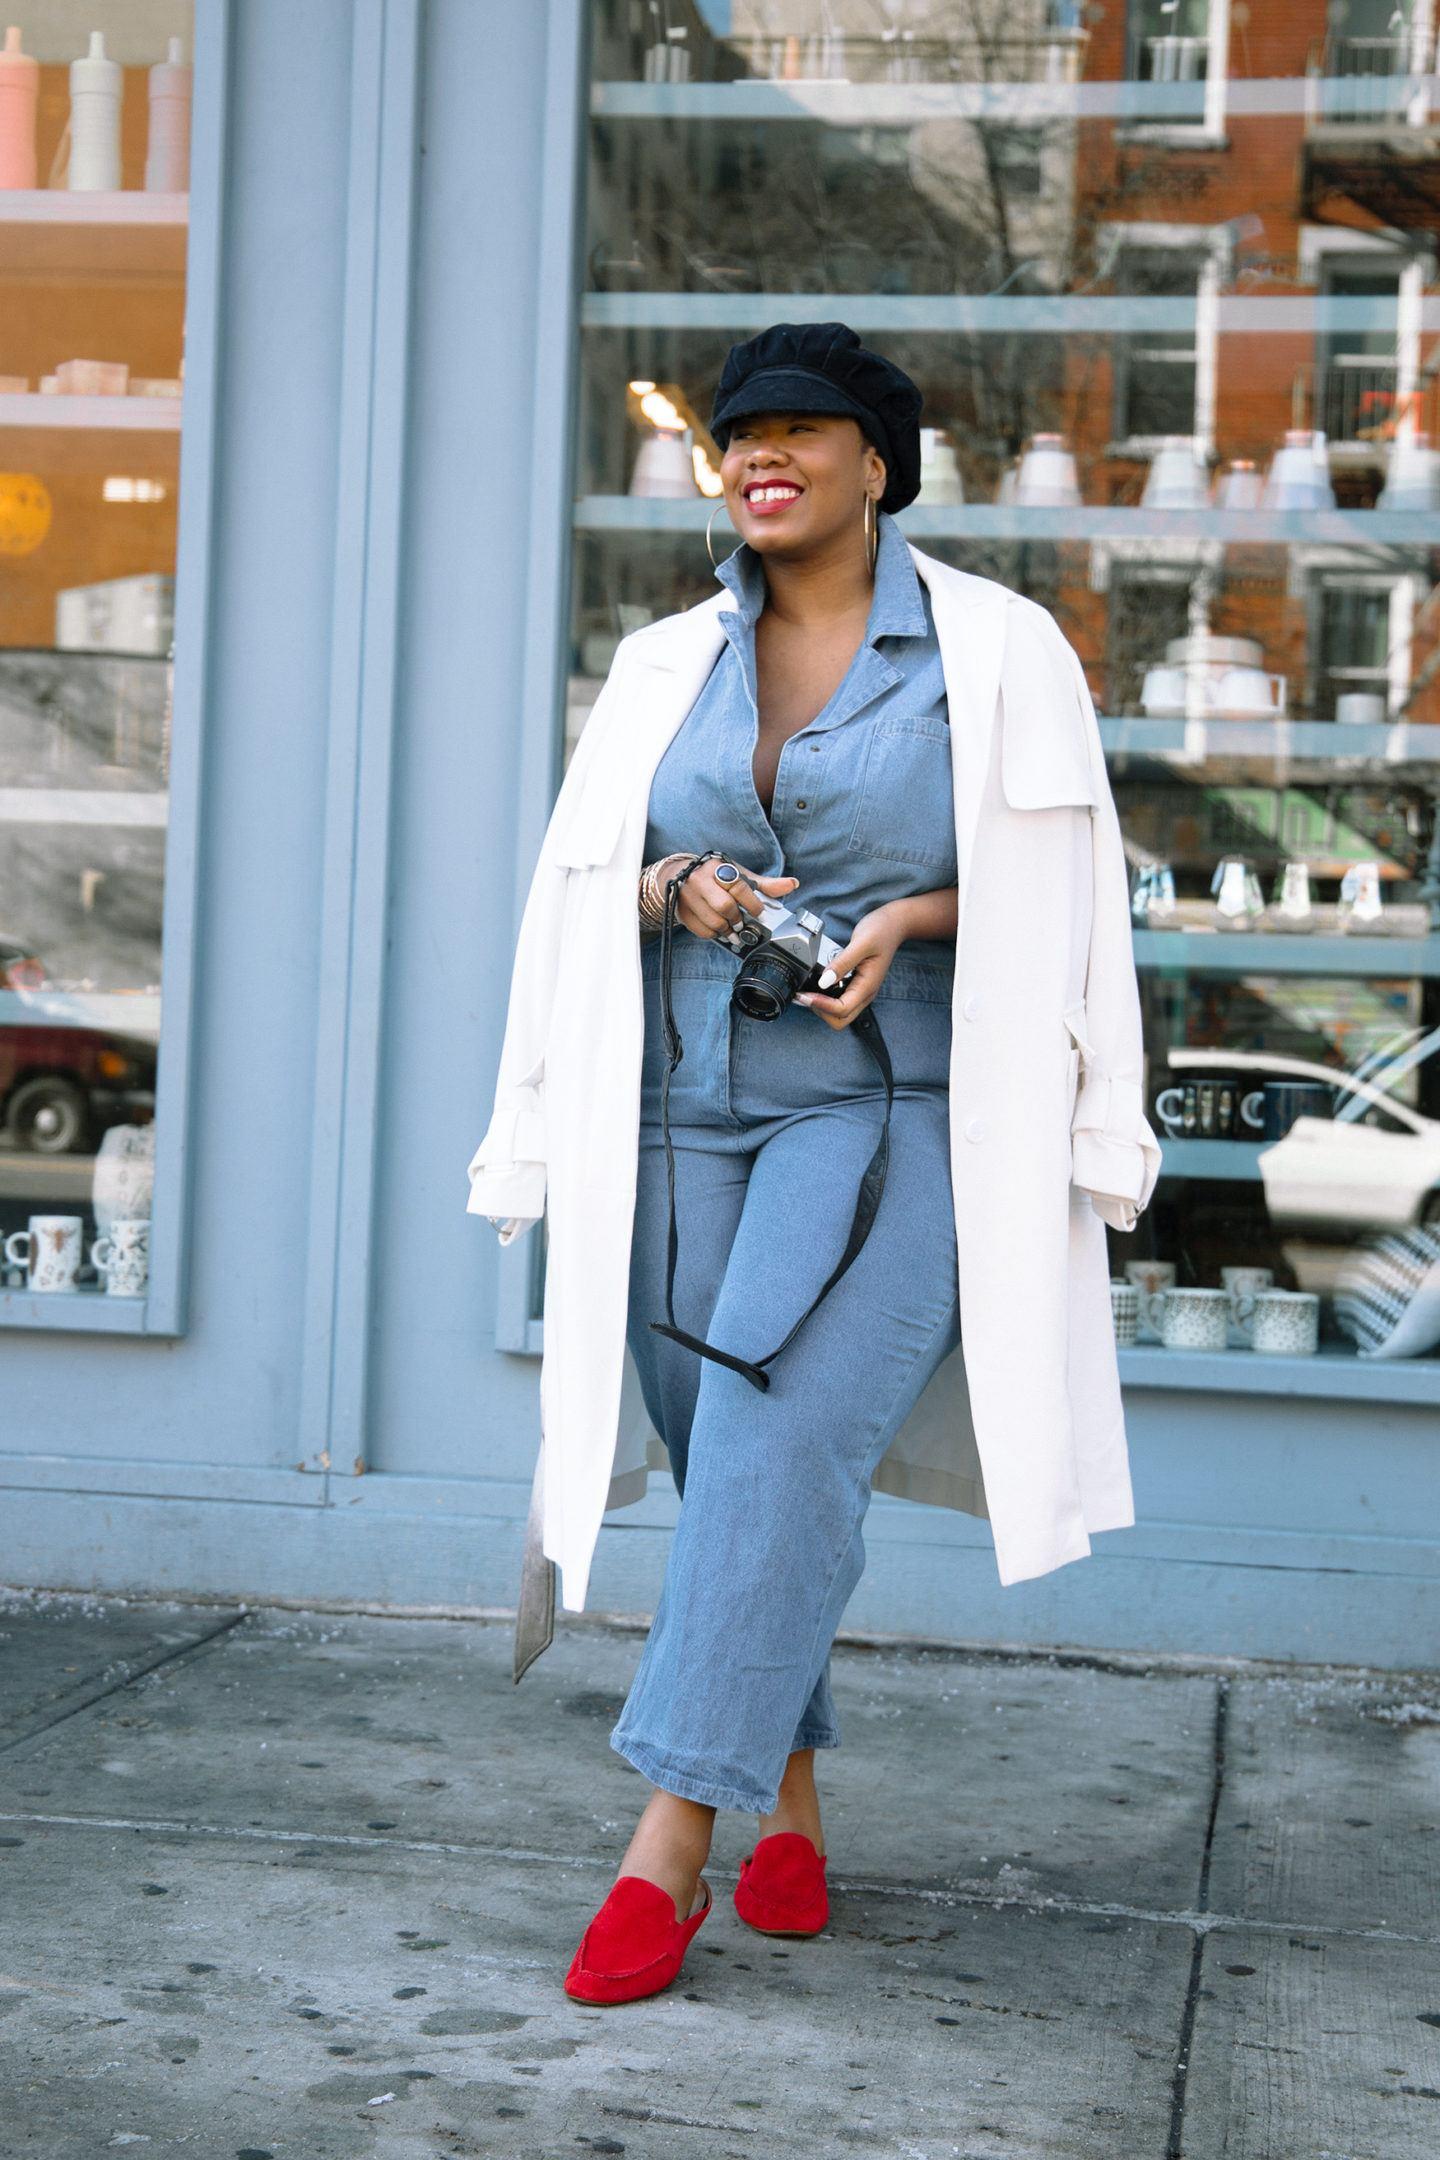 21 Trendy Easter Outfits For Black Women to Wear In 2022